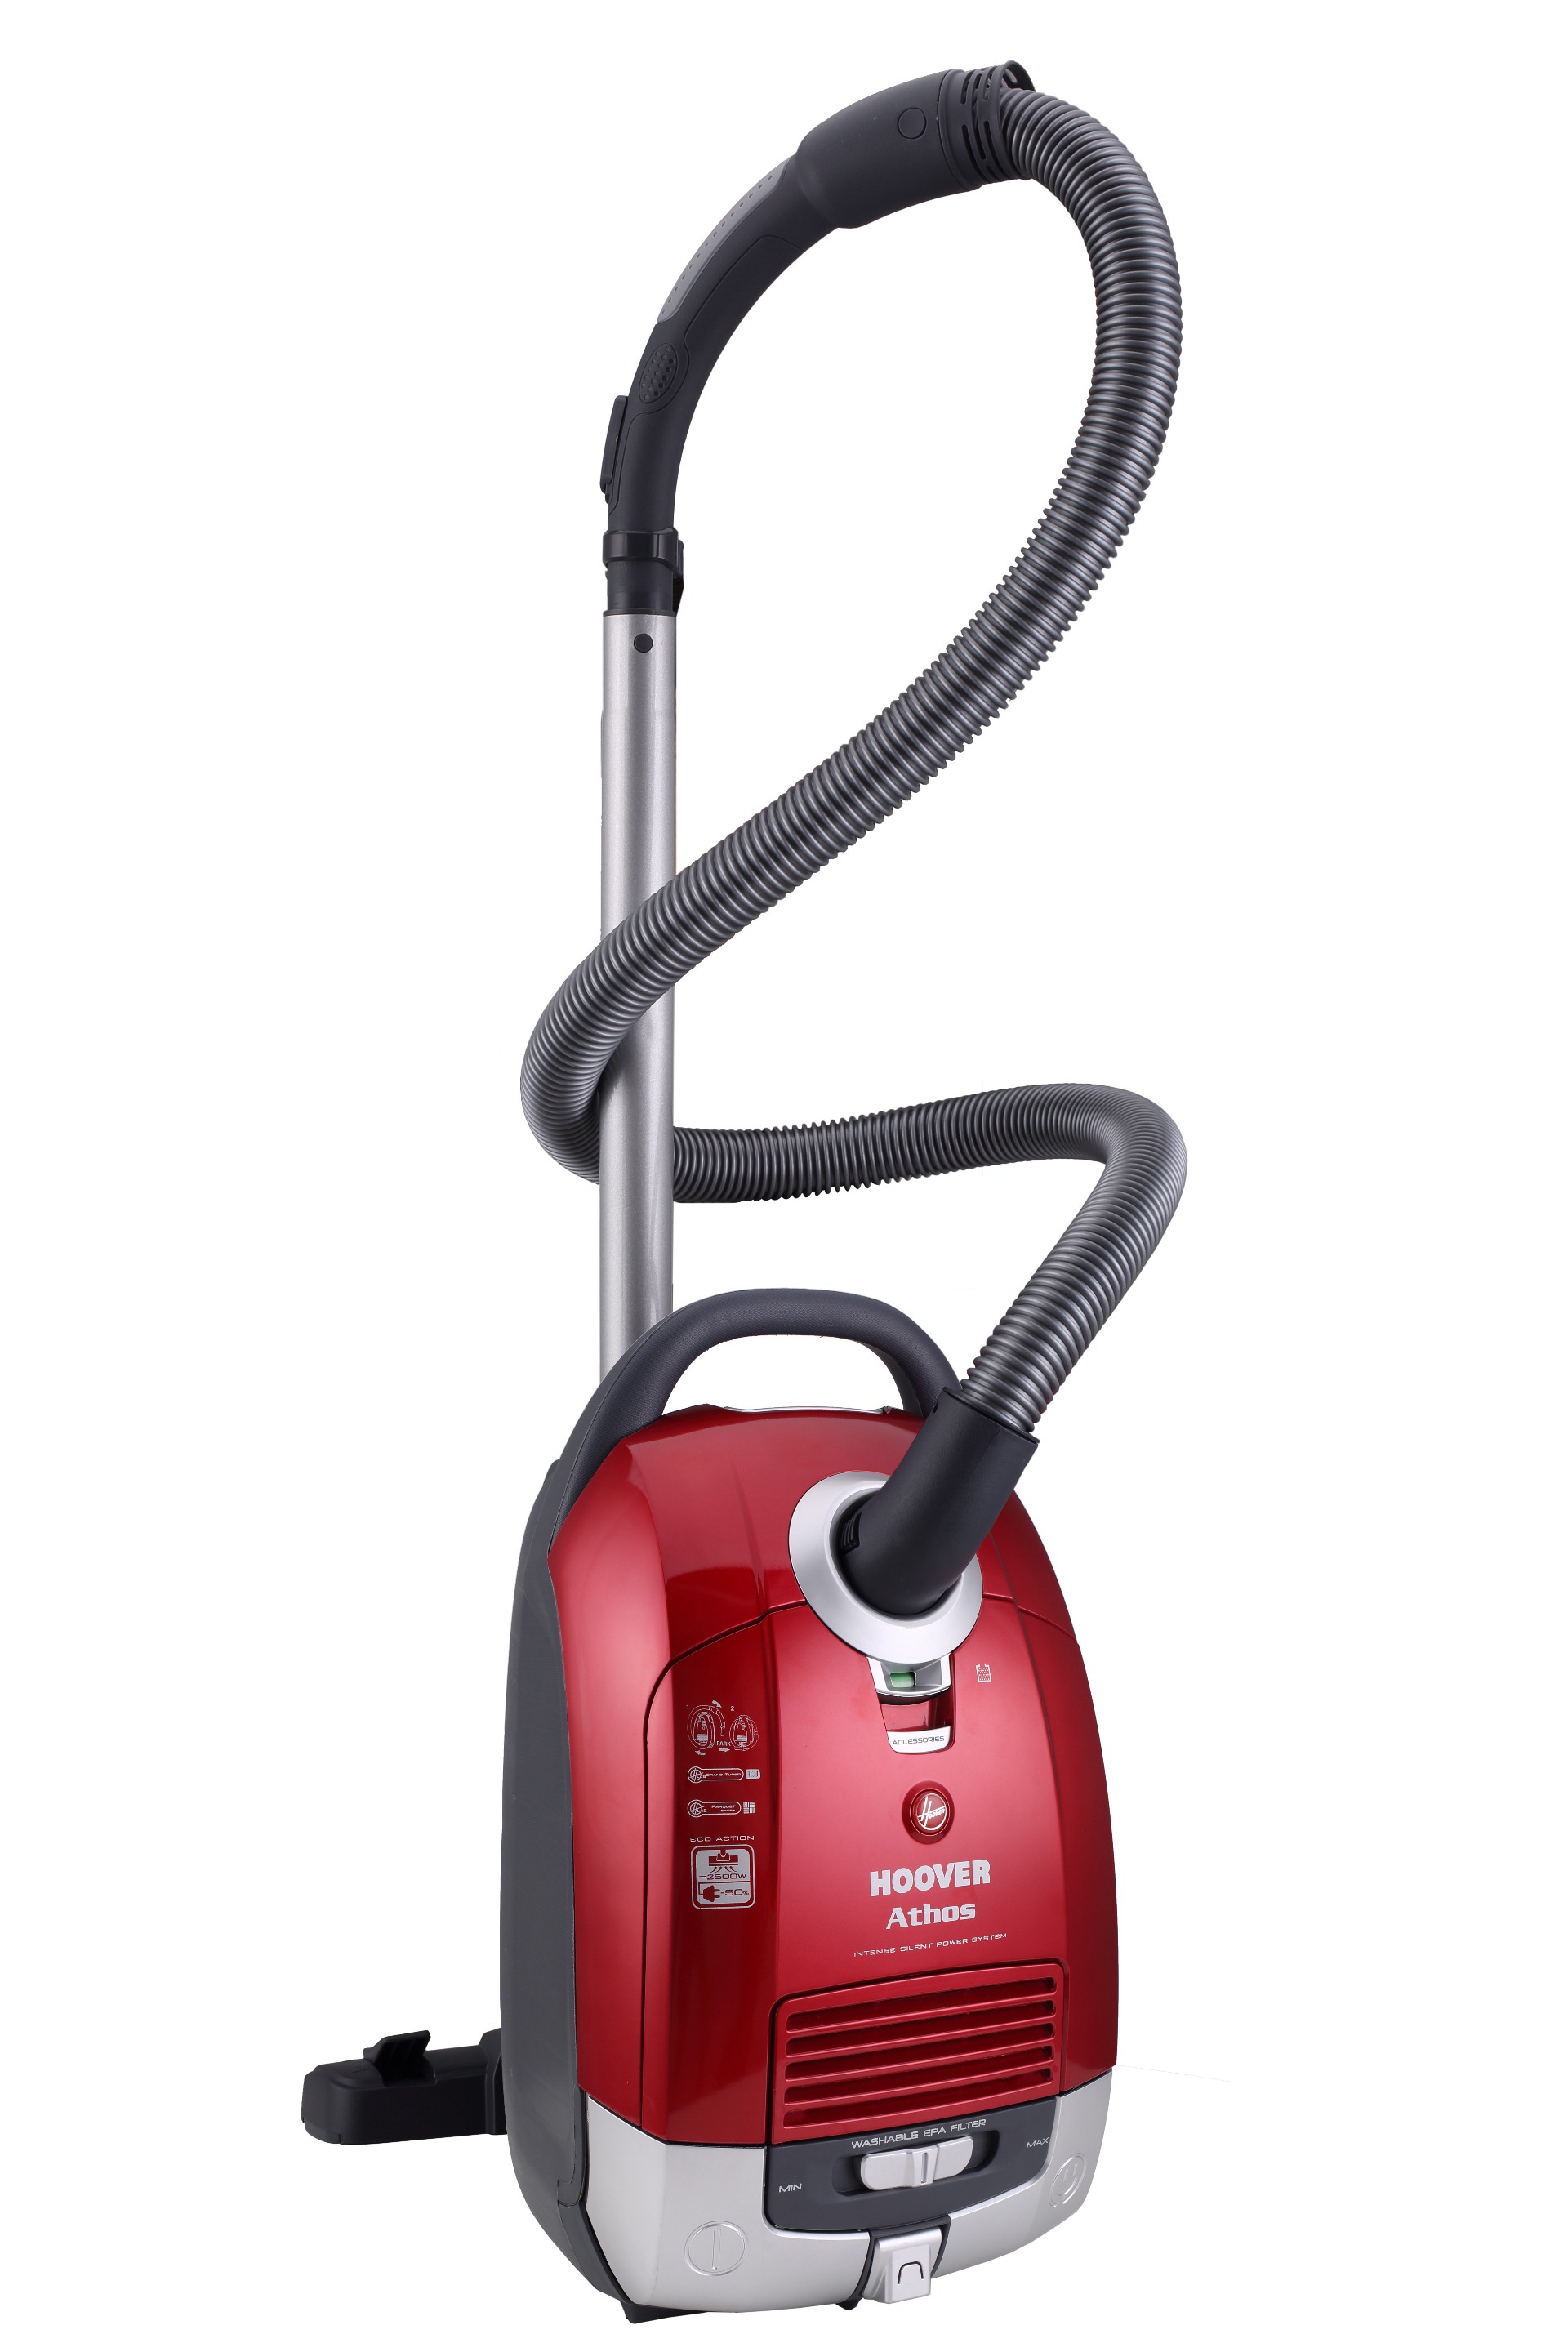 https://www.homeappliancesworld.com/files/2016/05/Hoover-Athos-4A_AT70_AT75011.jpg